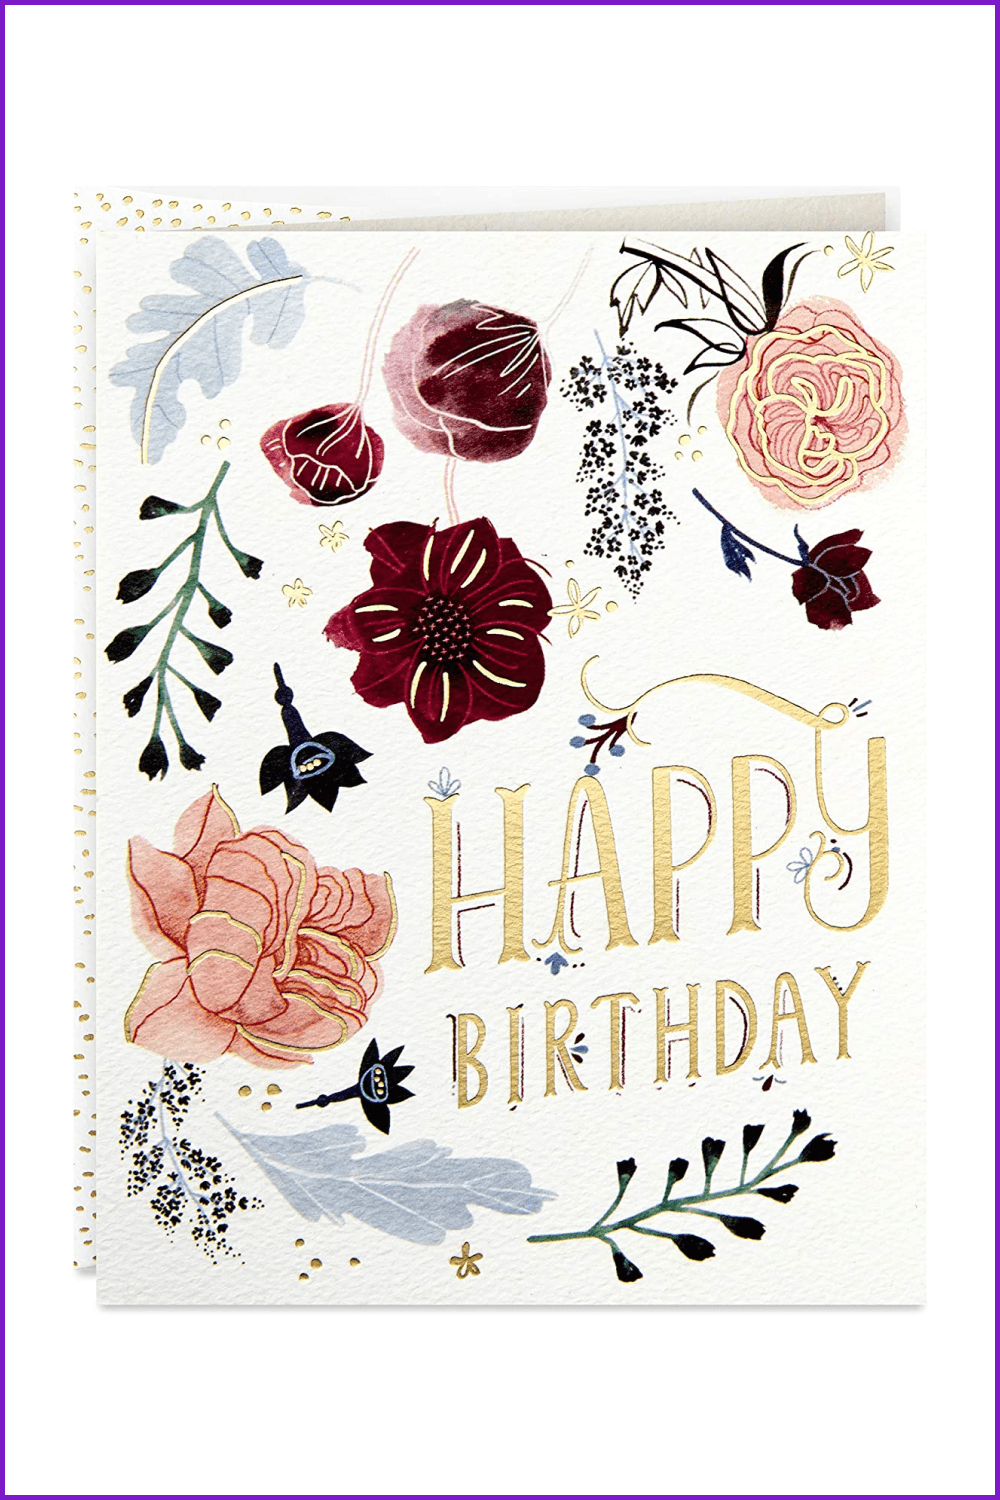 Flowers Hallmark Birthday Cards Assortment Cake Balloons 12 Cards with Envelopes 